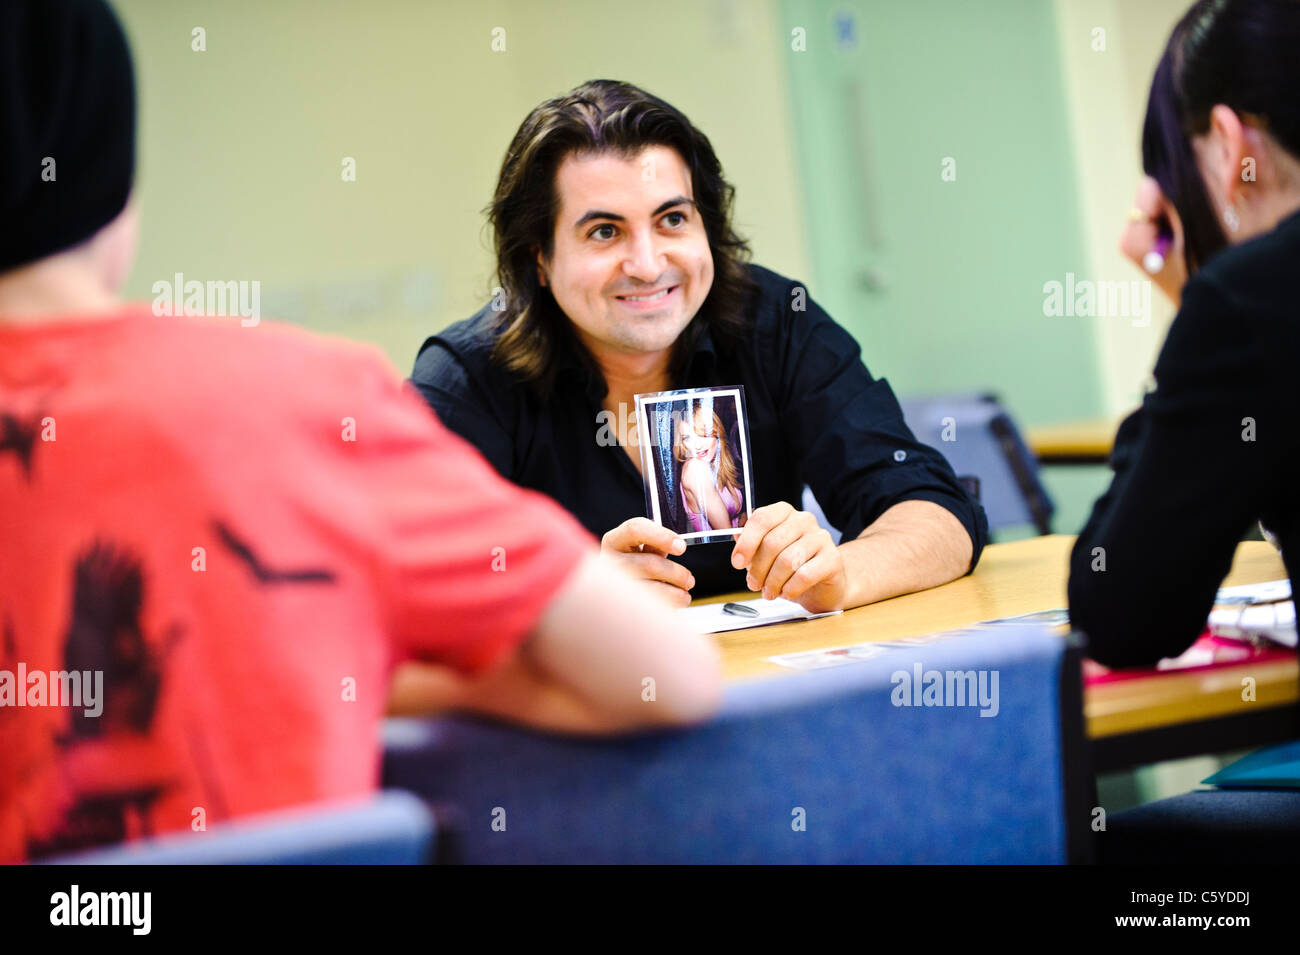 Adult male teacher in classroom setting holding up a photo of a celebrity towards two school children aged 12 to 13 years Stock Photo